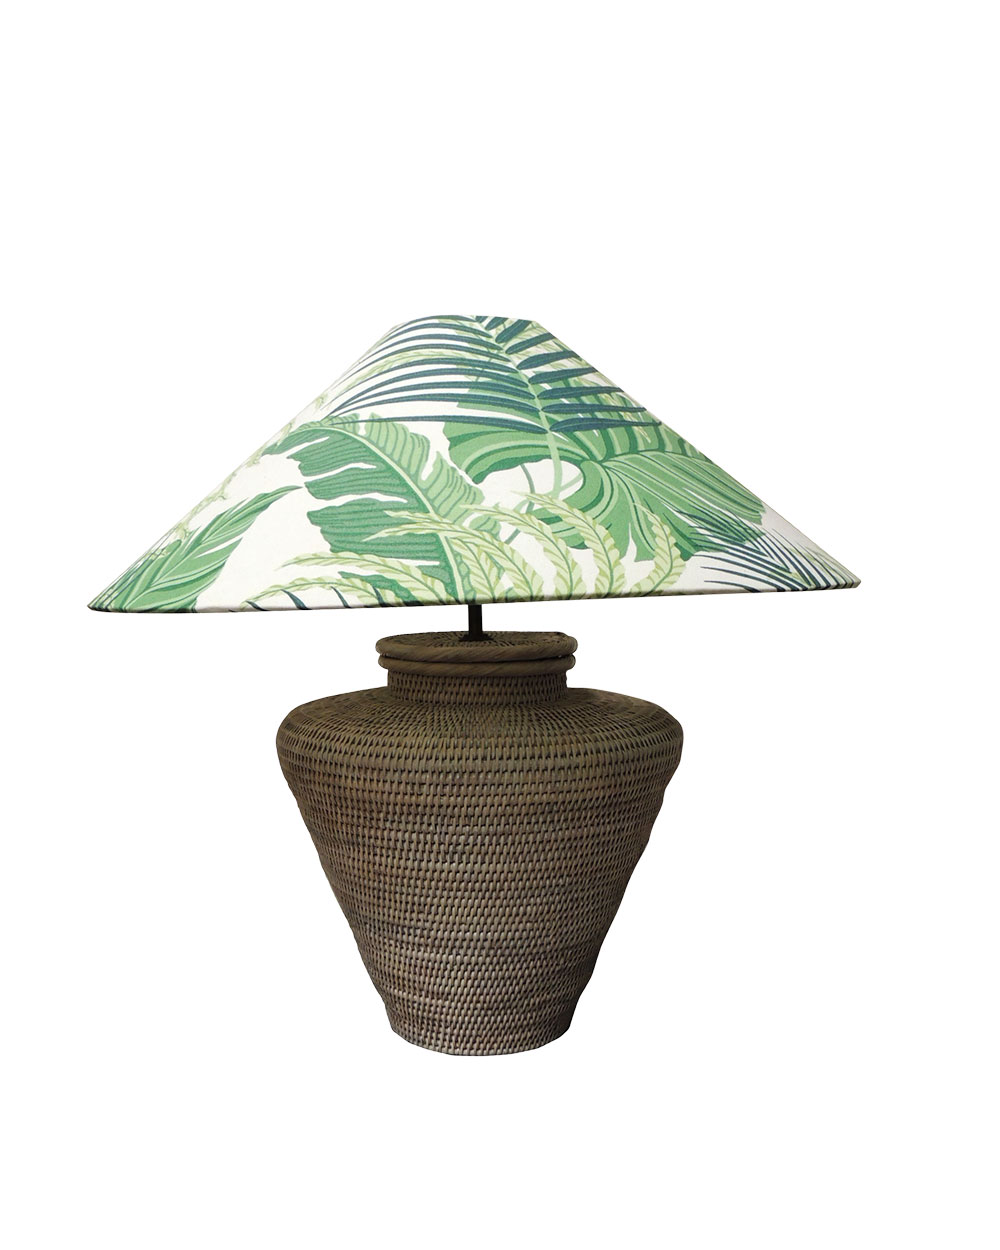 Lamp, $545, from Le Monde. Ph: 09 950 9709